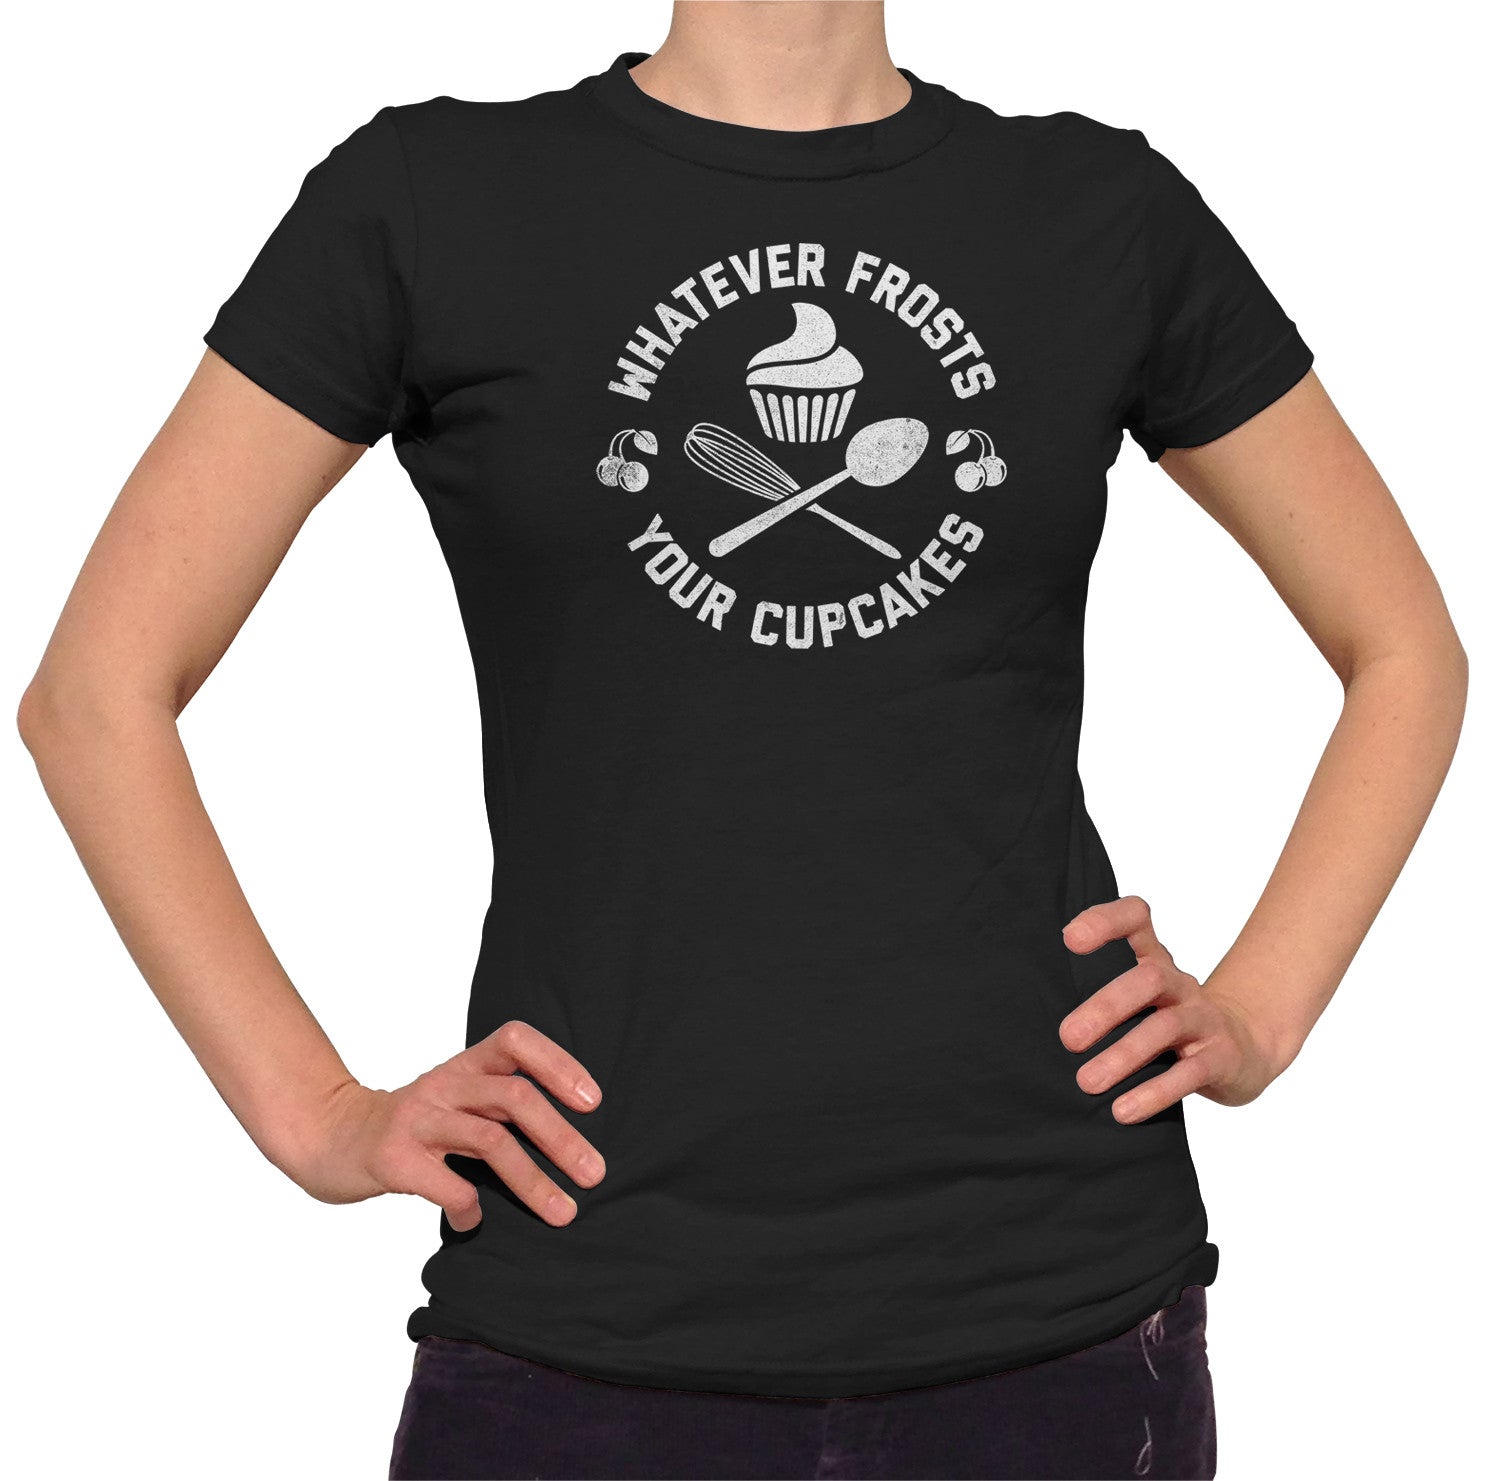 Women's Whatever Frosts Your Cupcakes T-Shirt